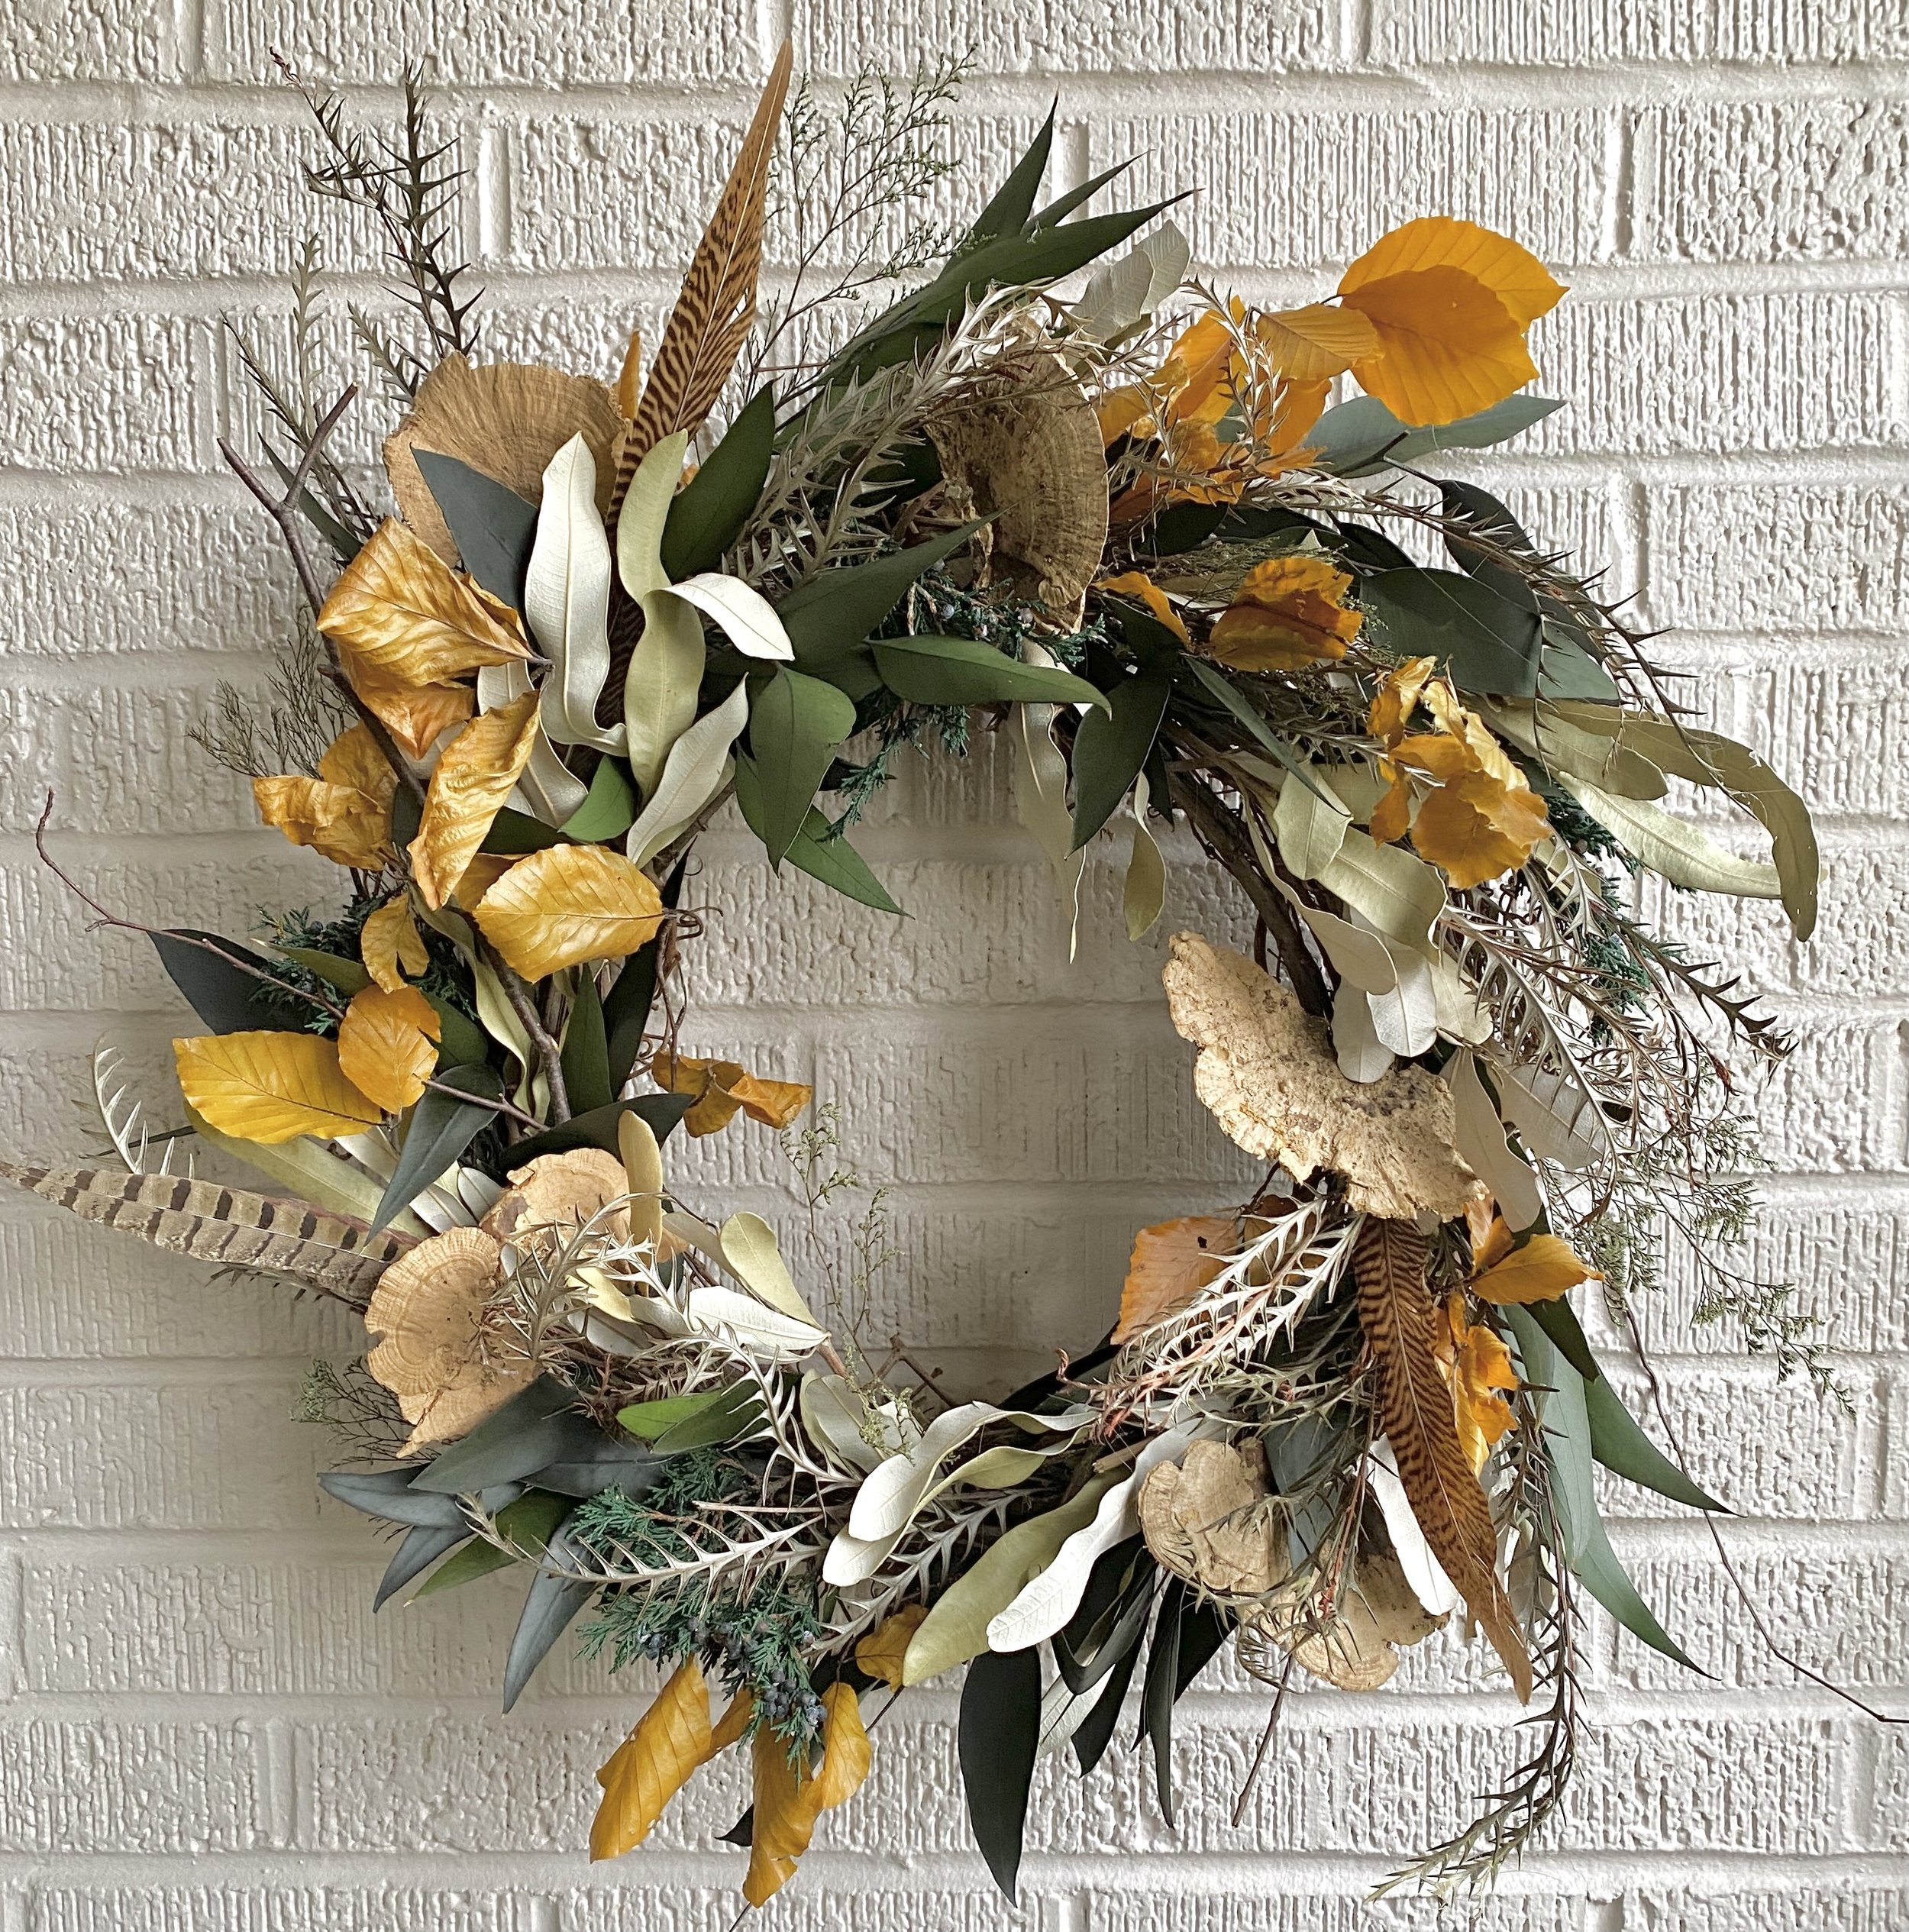 Wild Natural Wreath with Mushrooms, Aspen Leaves and Feathers